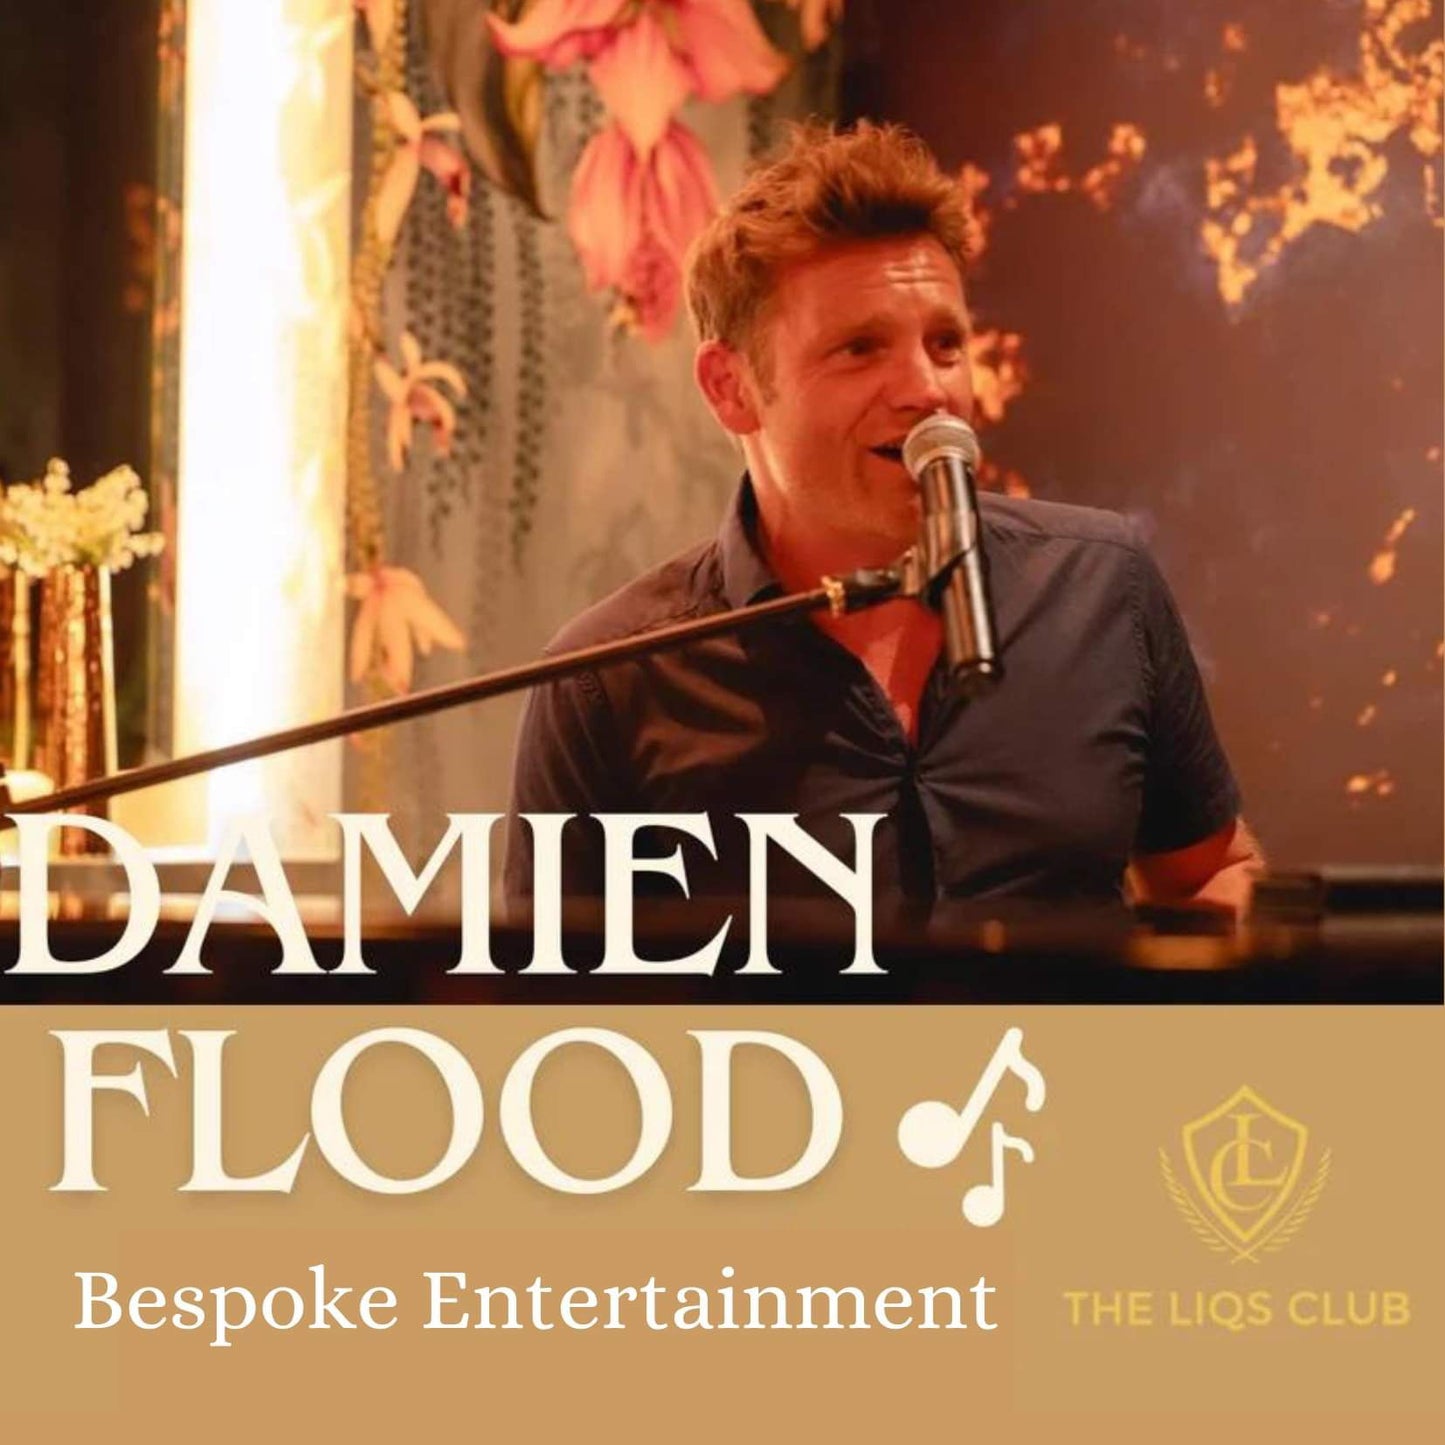 An Evening with Damien Flood at his Piano - Thursday 19th December 2024 - Doors open7pm show time 8.30pm.